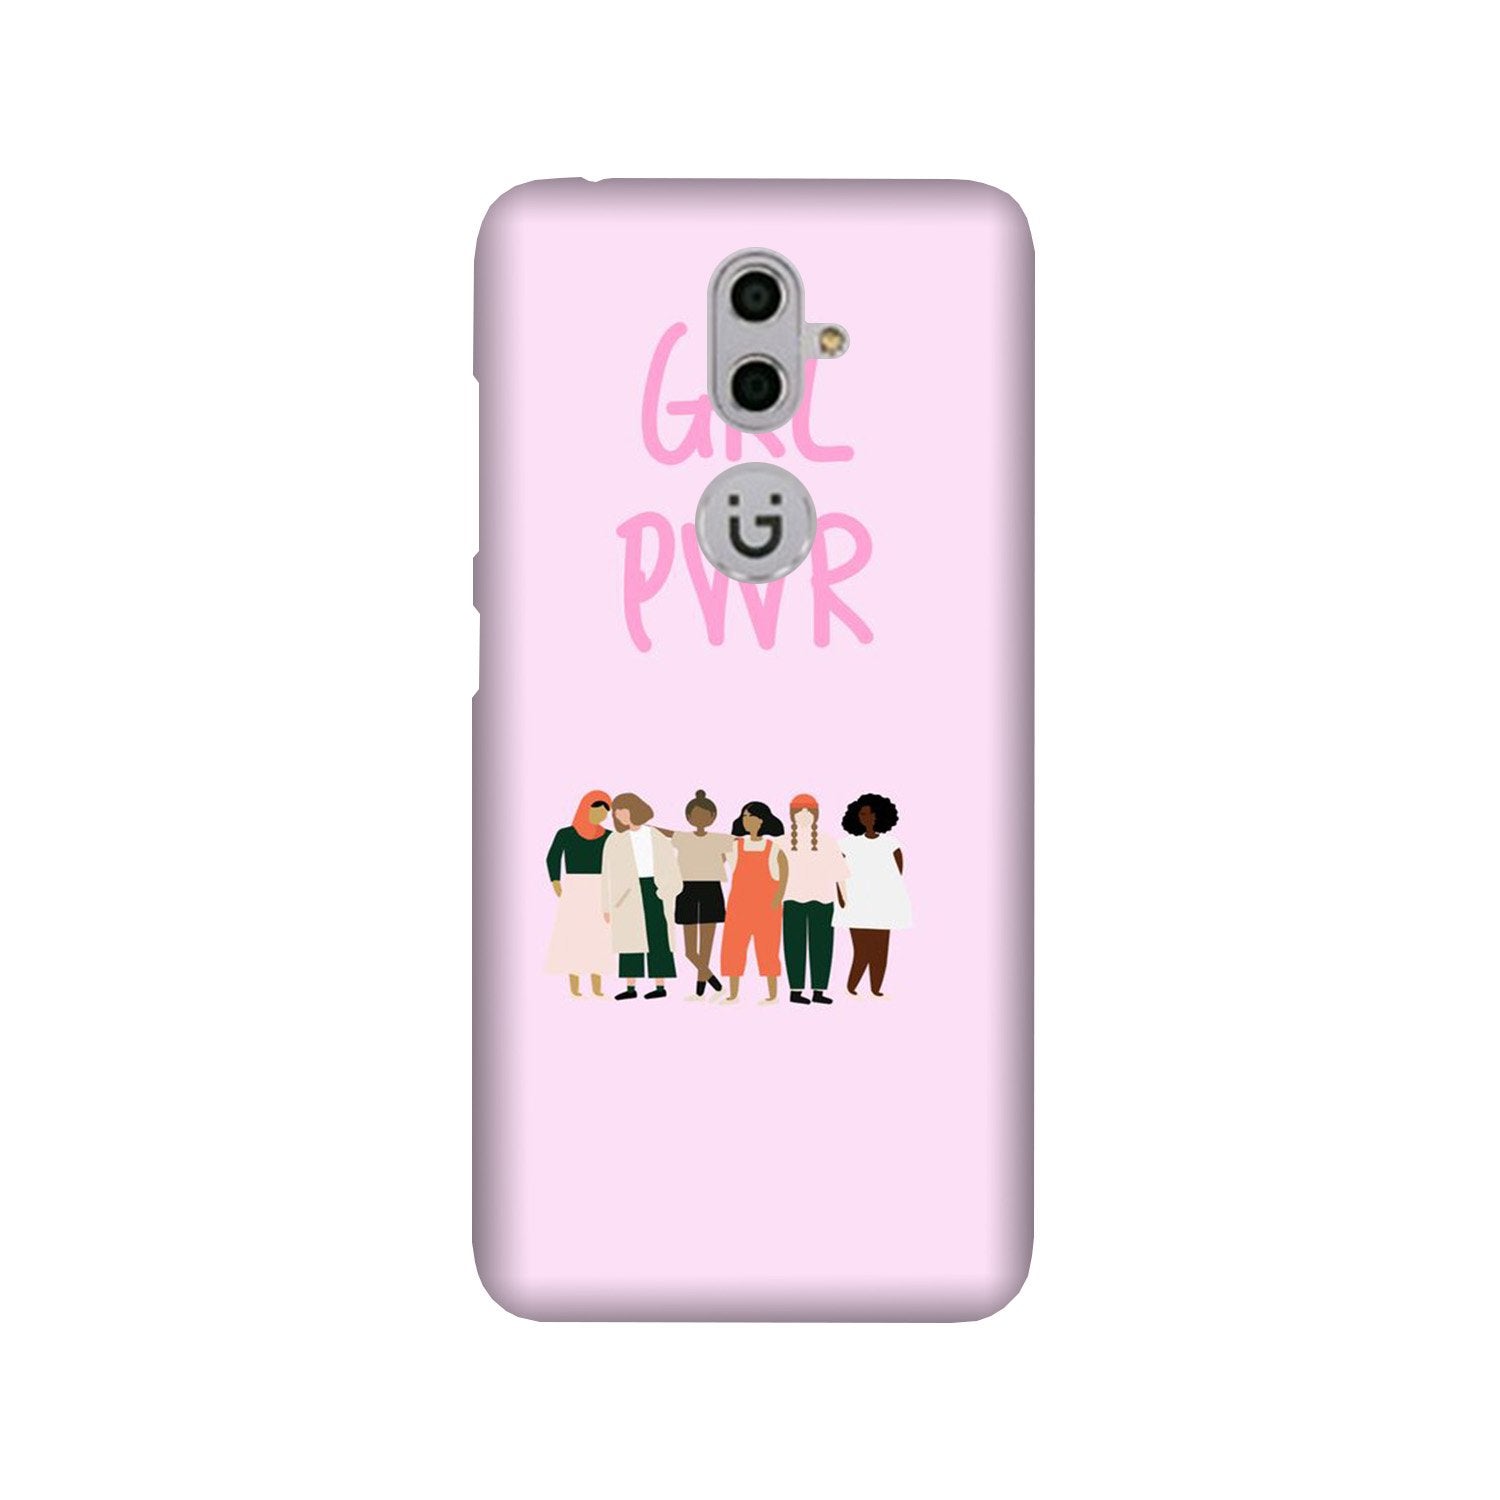 Girl Power Case for Gionee S9 (Design No. 267)